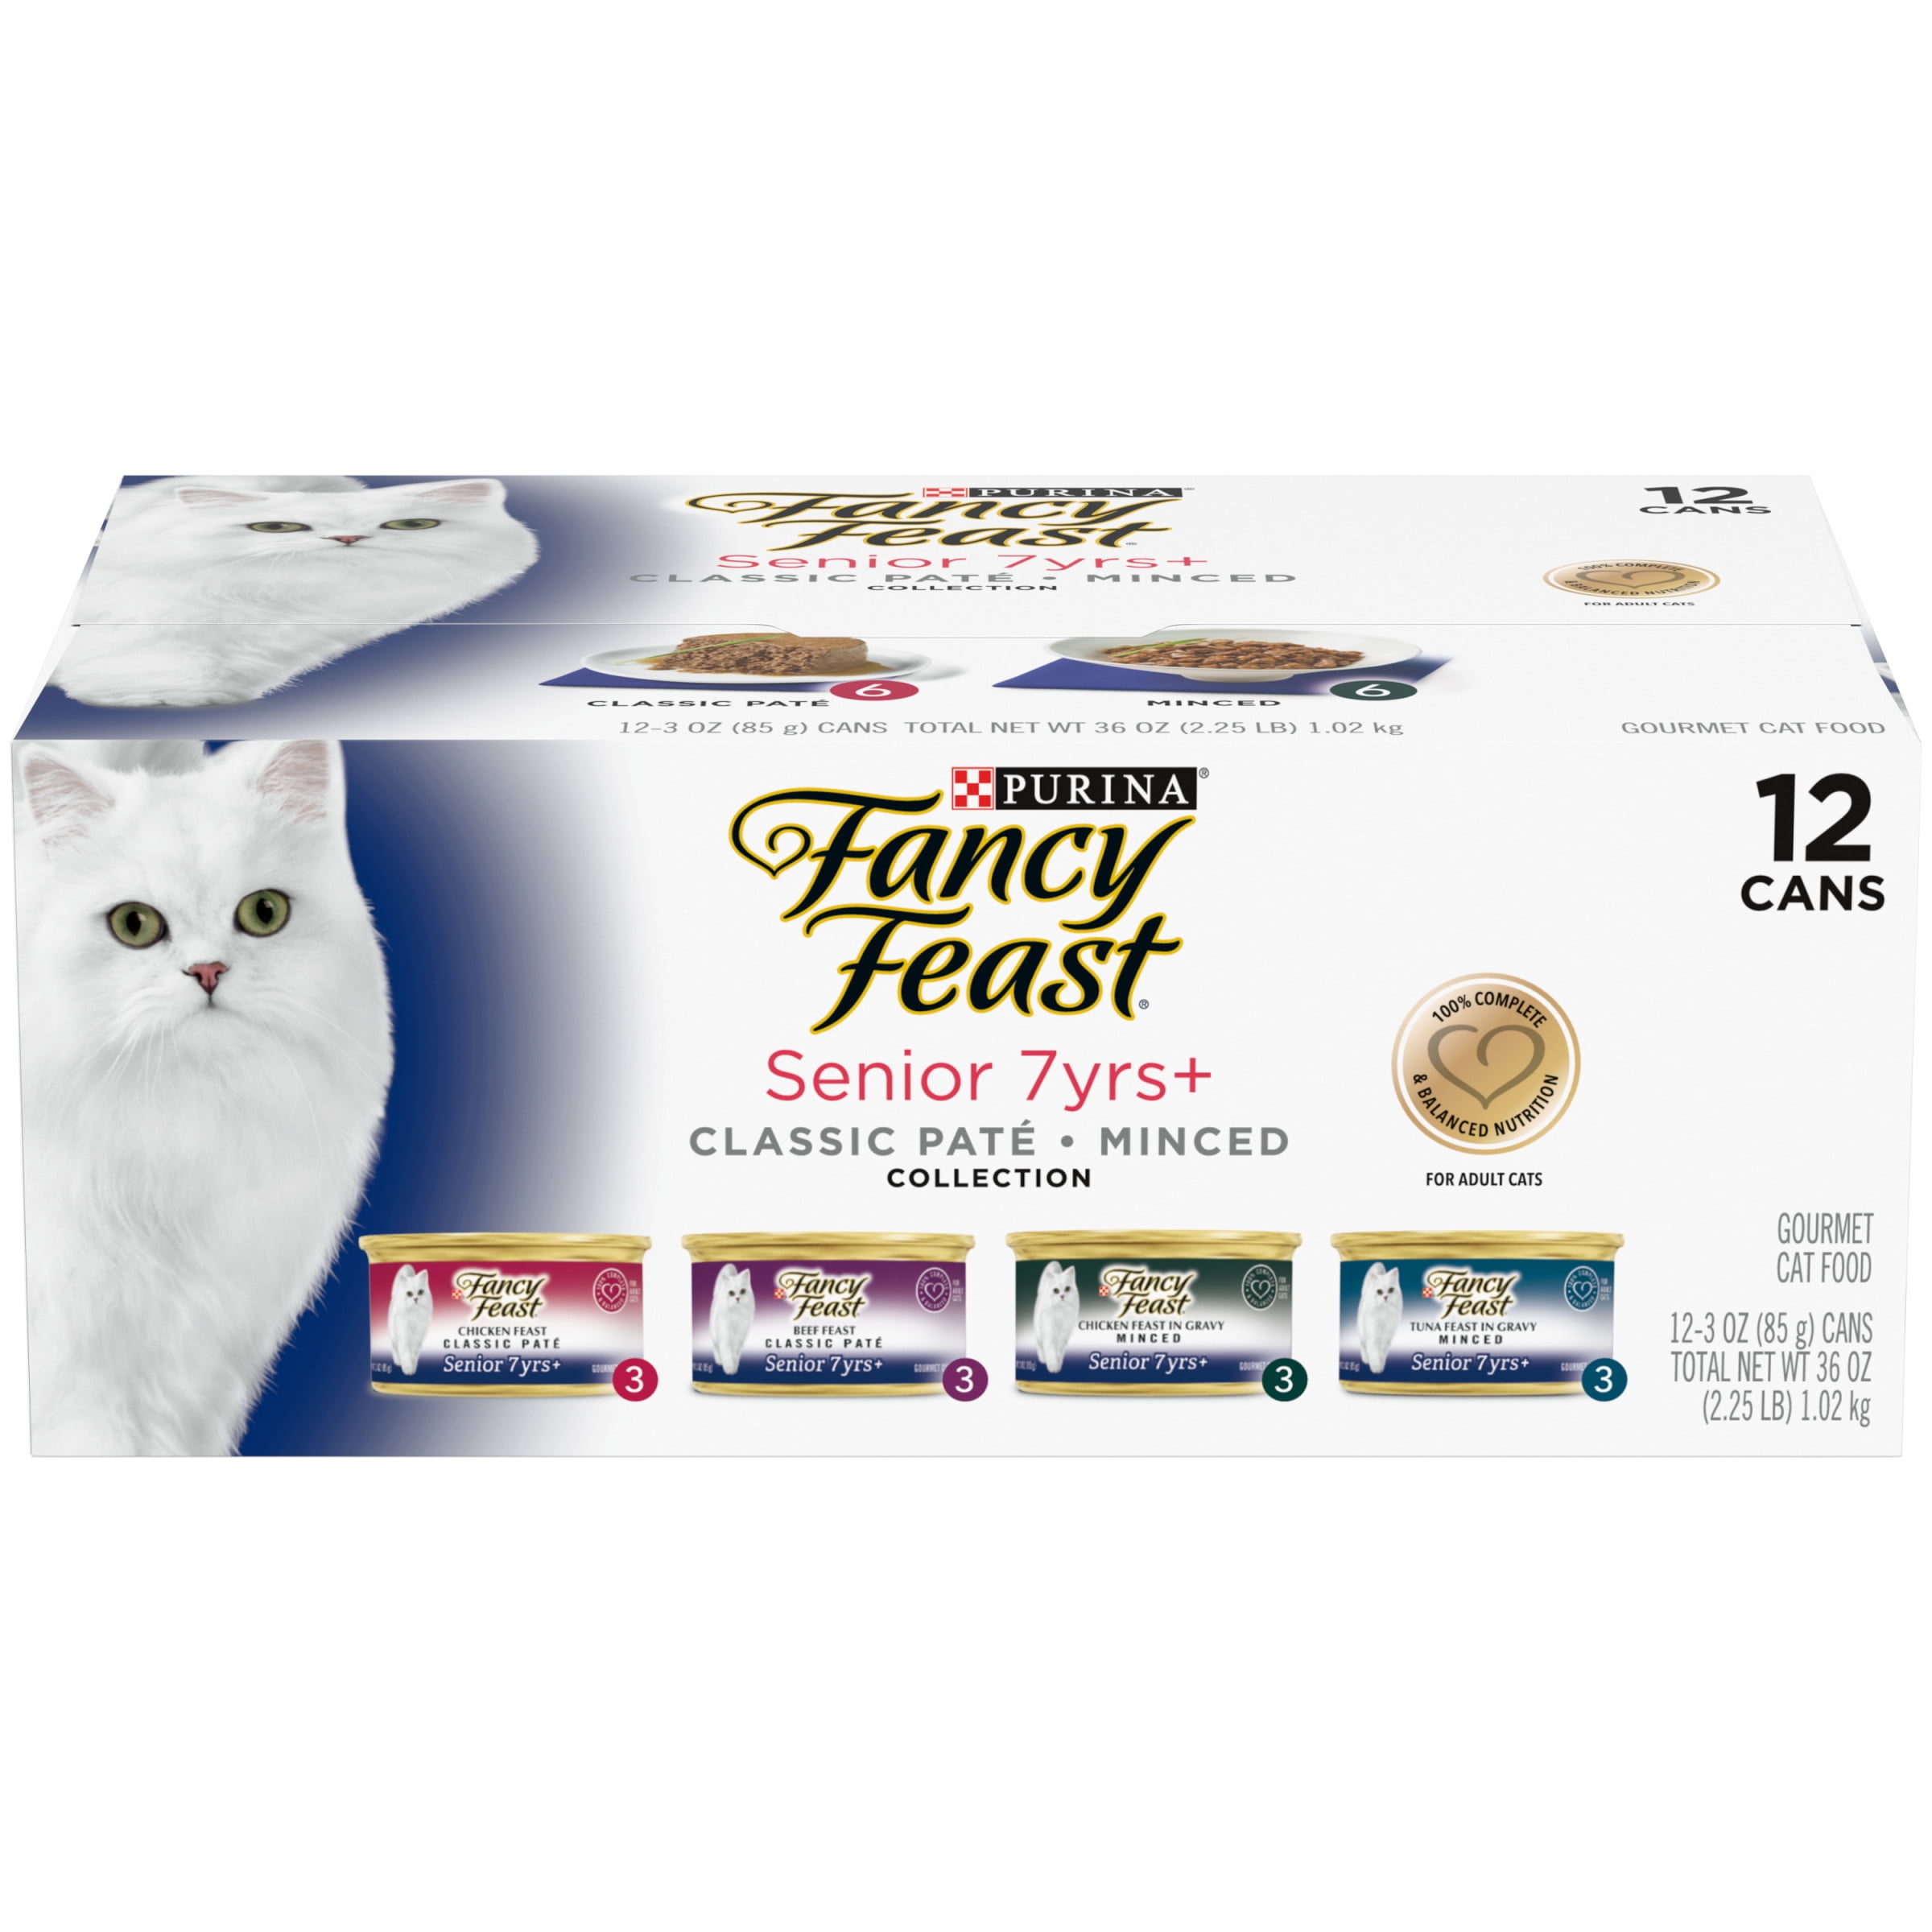 Purina Fancy Feast Wet Cat Food for Adult Cats Variety Pack, 3 oz Cans (12 Pack)